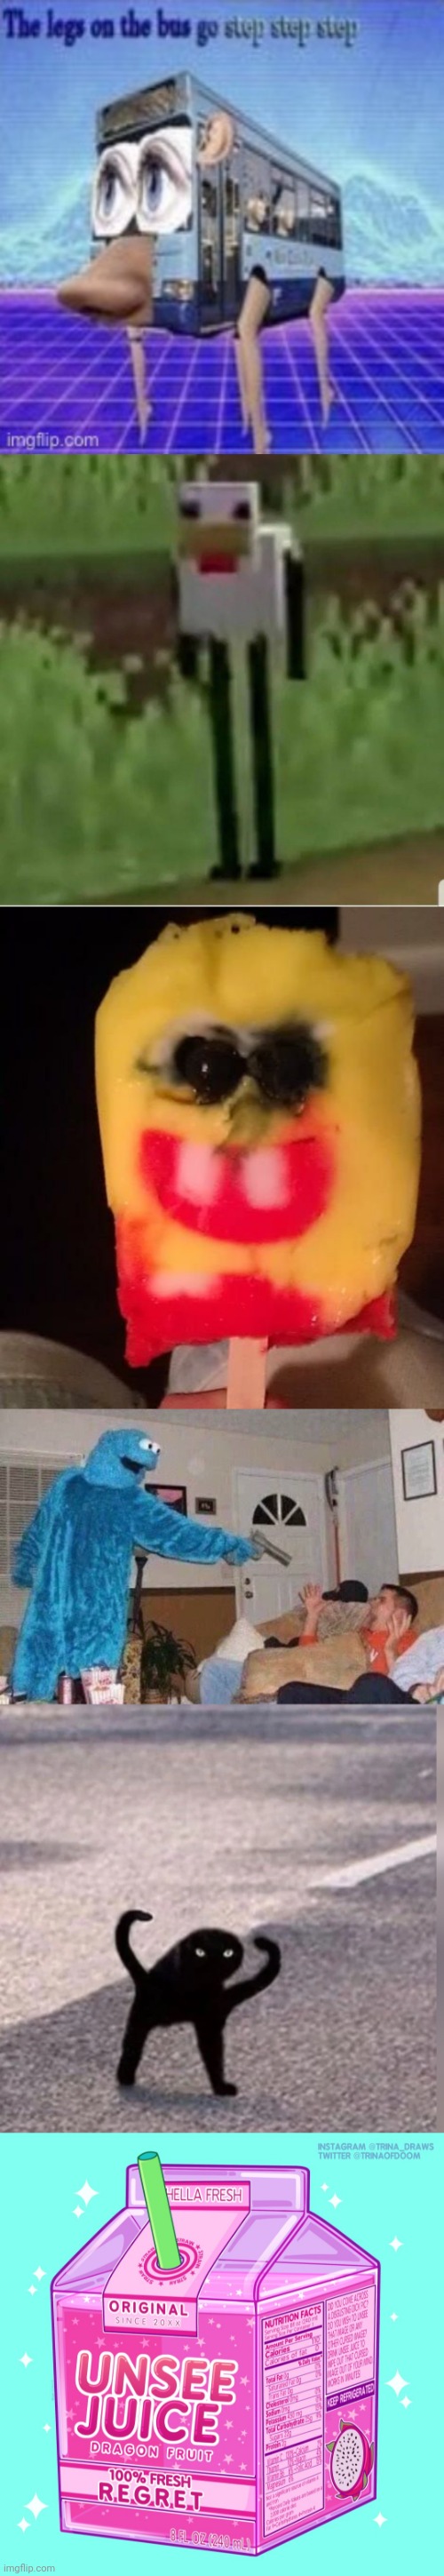 Lemme unsee pls | image tagged in the legs on the bus go step step,cursed minecraft chicken,cursed spongebob popsicle,cursed cookie monster,cursed cat,unsee juice | made w/ Imgflip meme maker